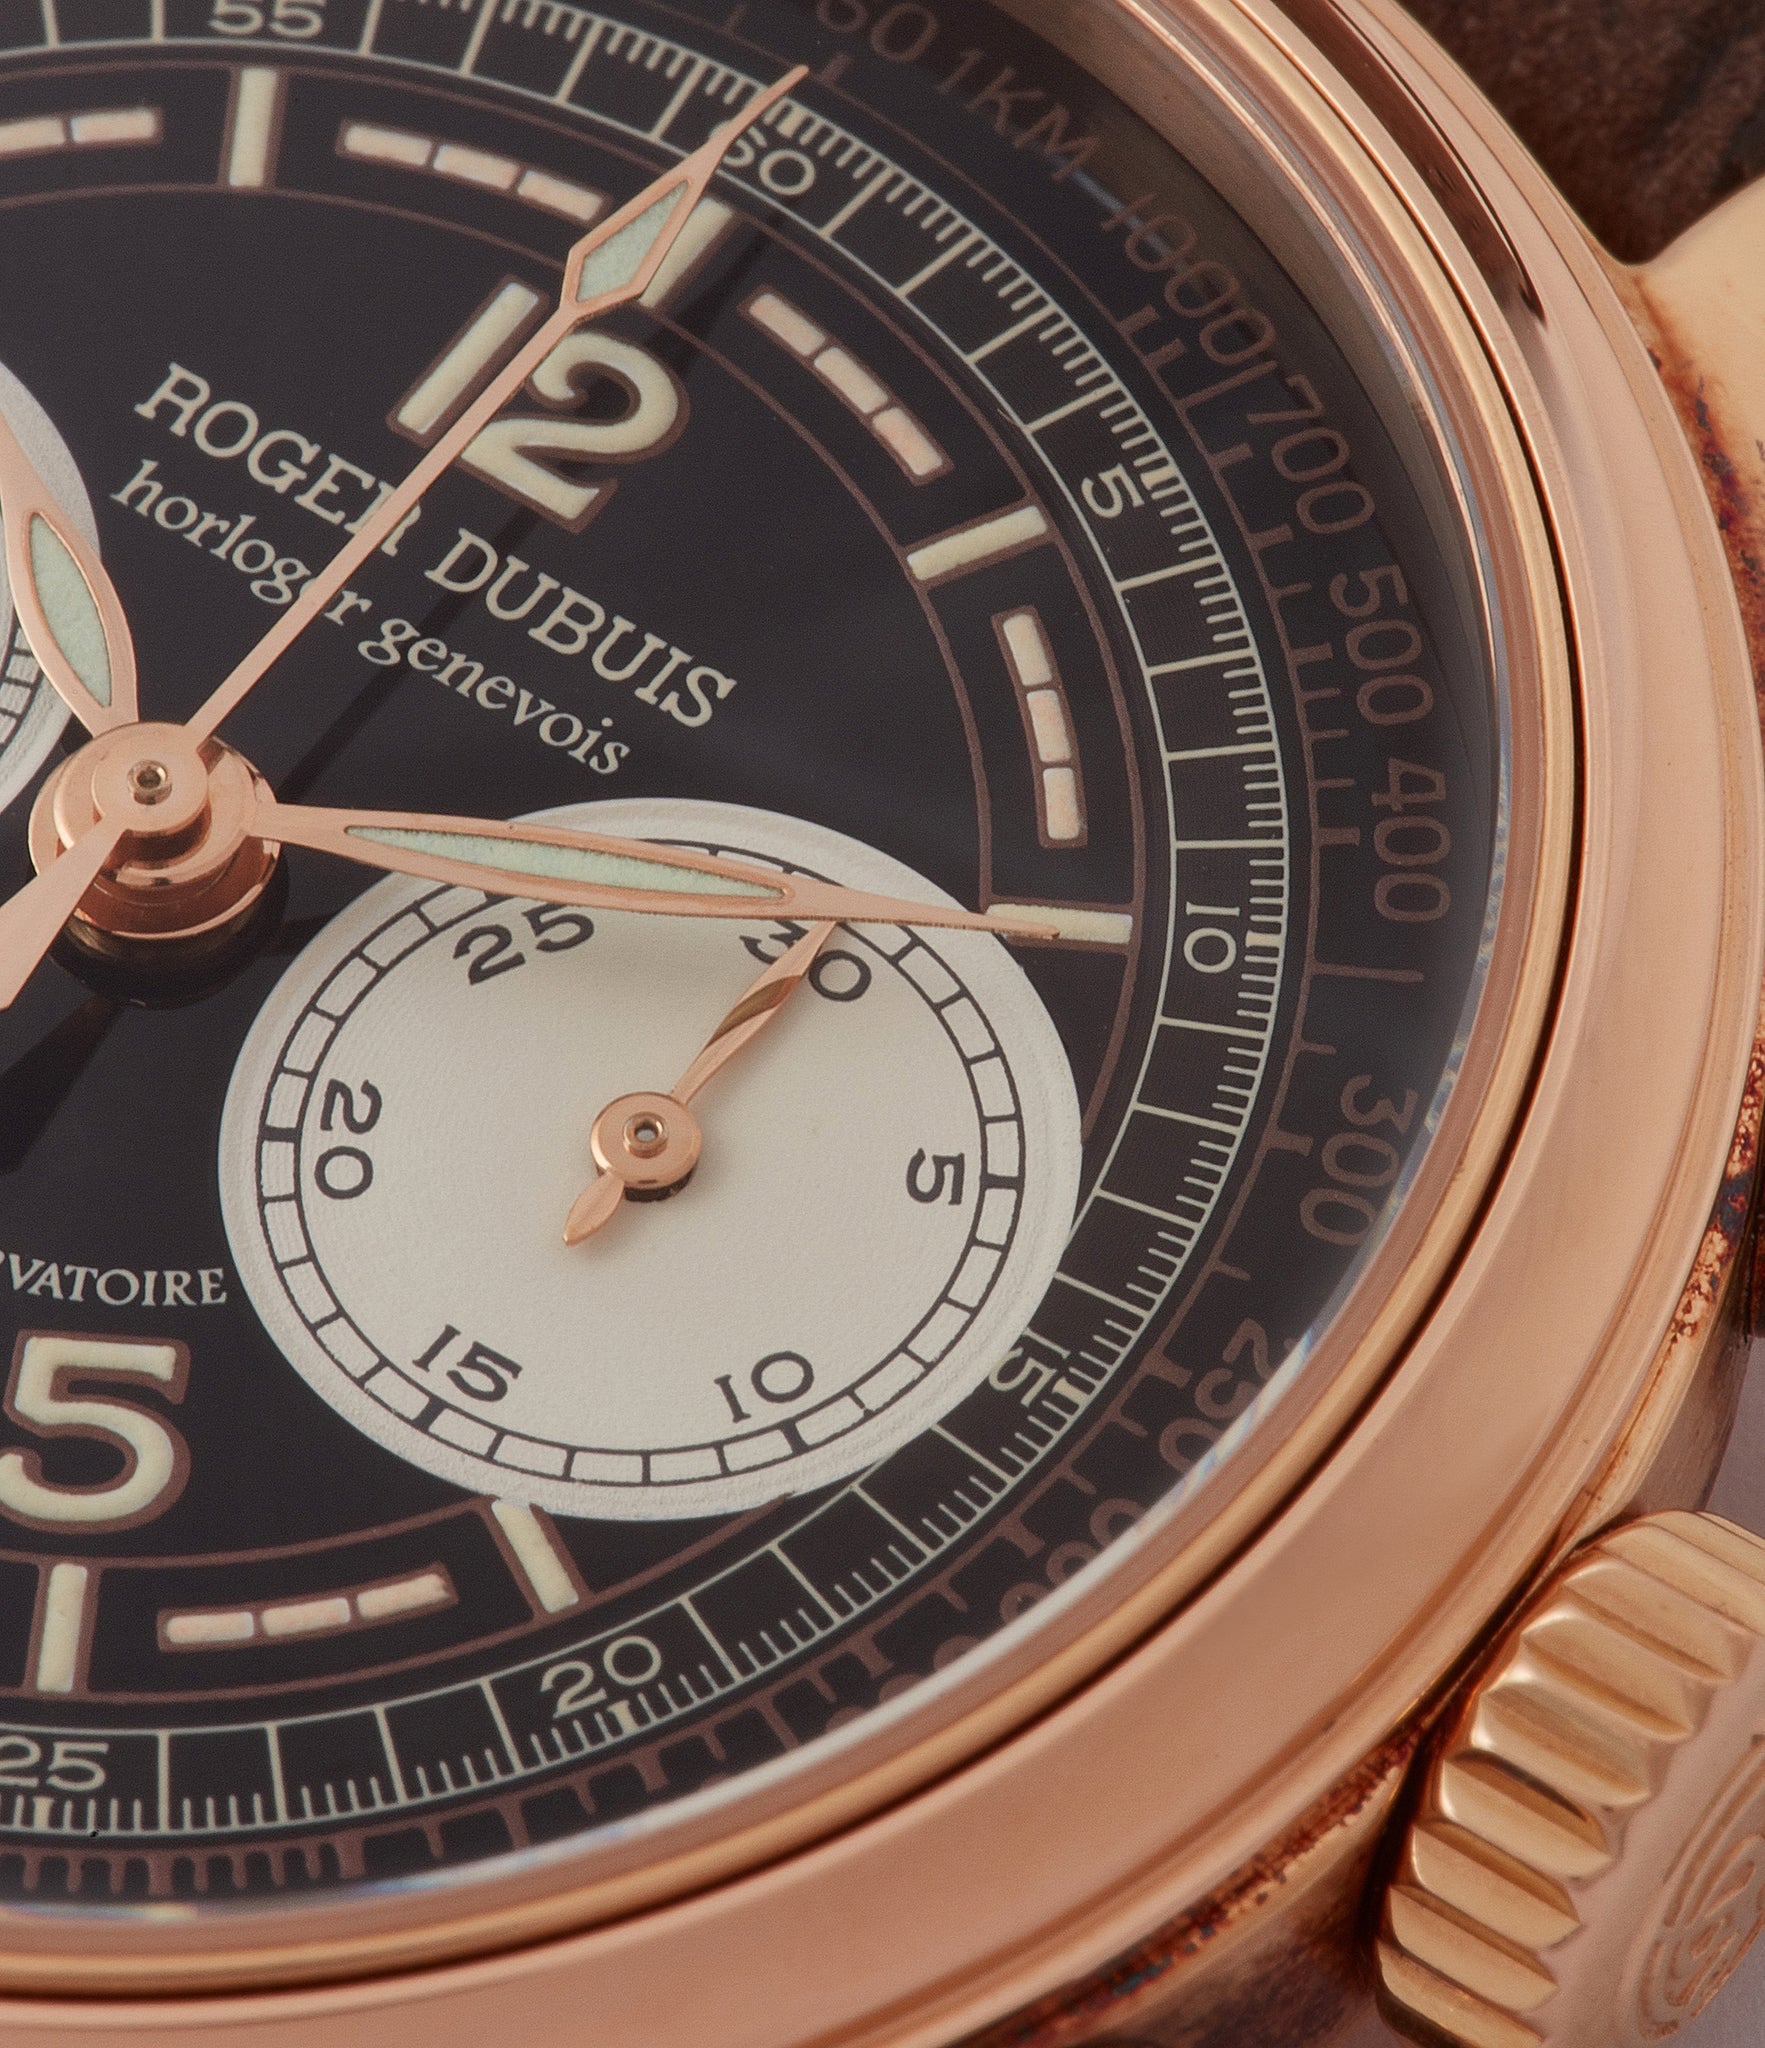 Chronograph Roger Dubuis Hommage Cal. RD56 H37 560 rose gold watch black dial for sale online at A Collected Man London UK specialist of rare watches